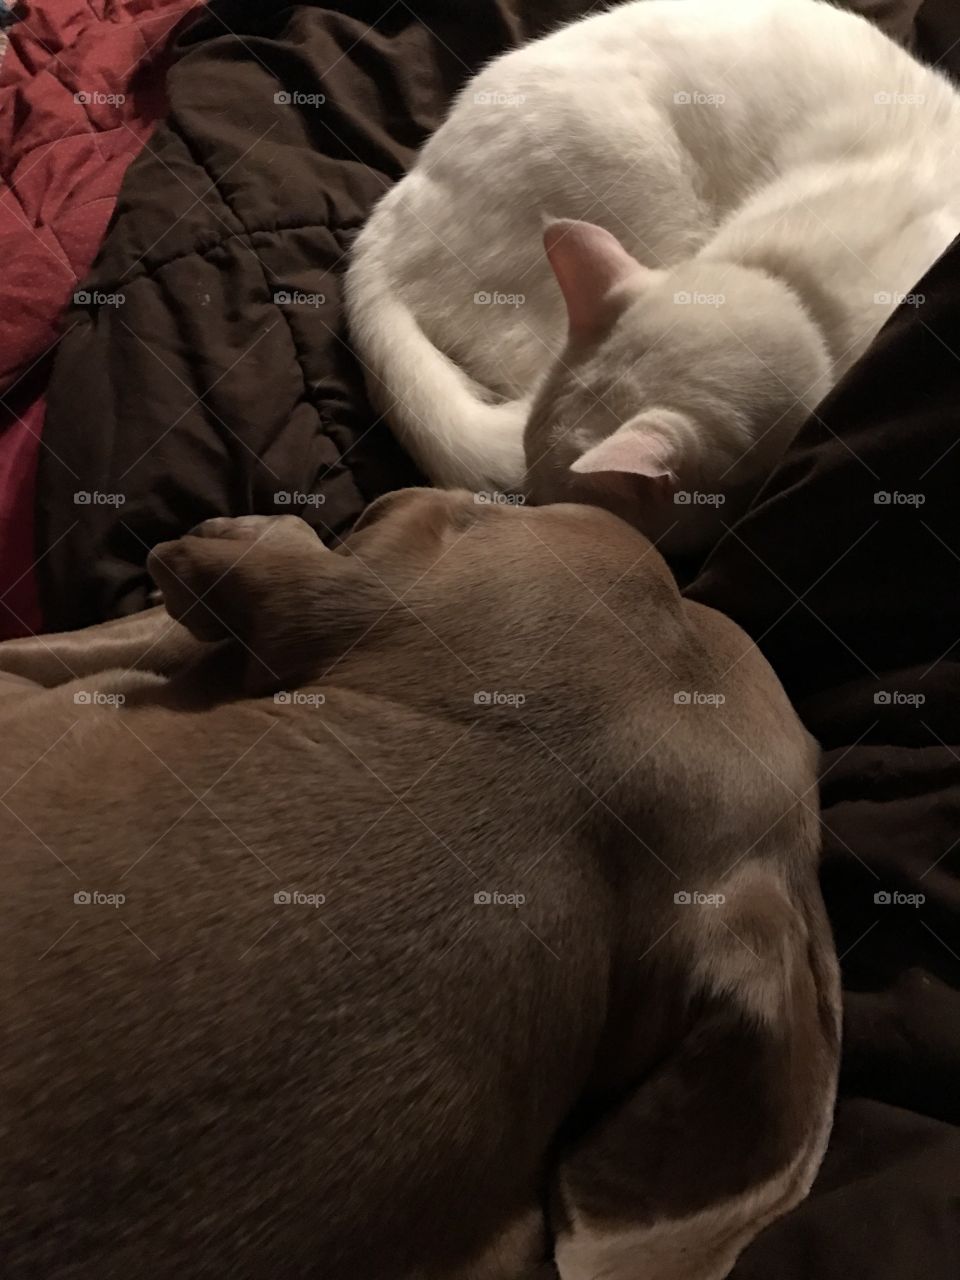 Casper the cat and Elvis the dog, cuddled ready for bed